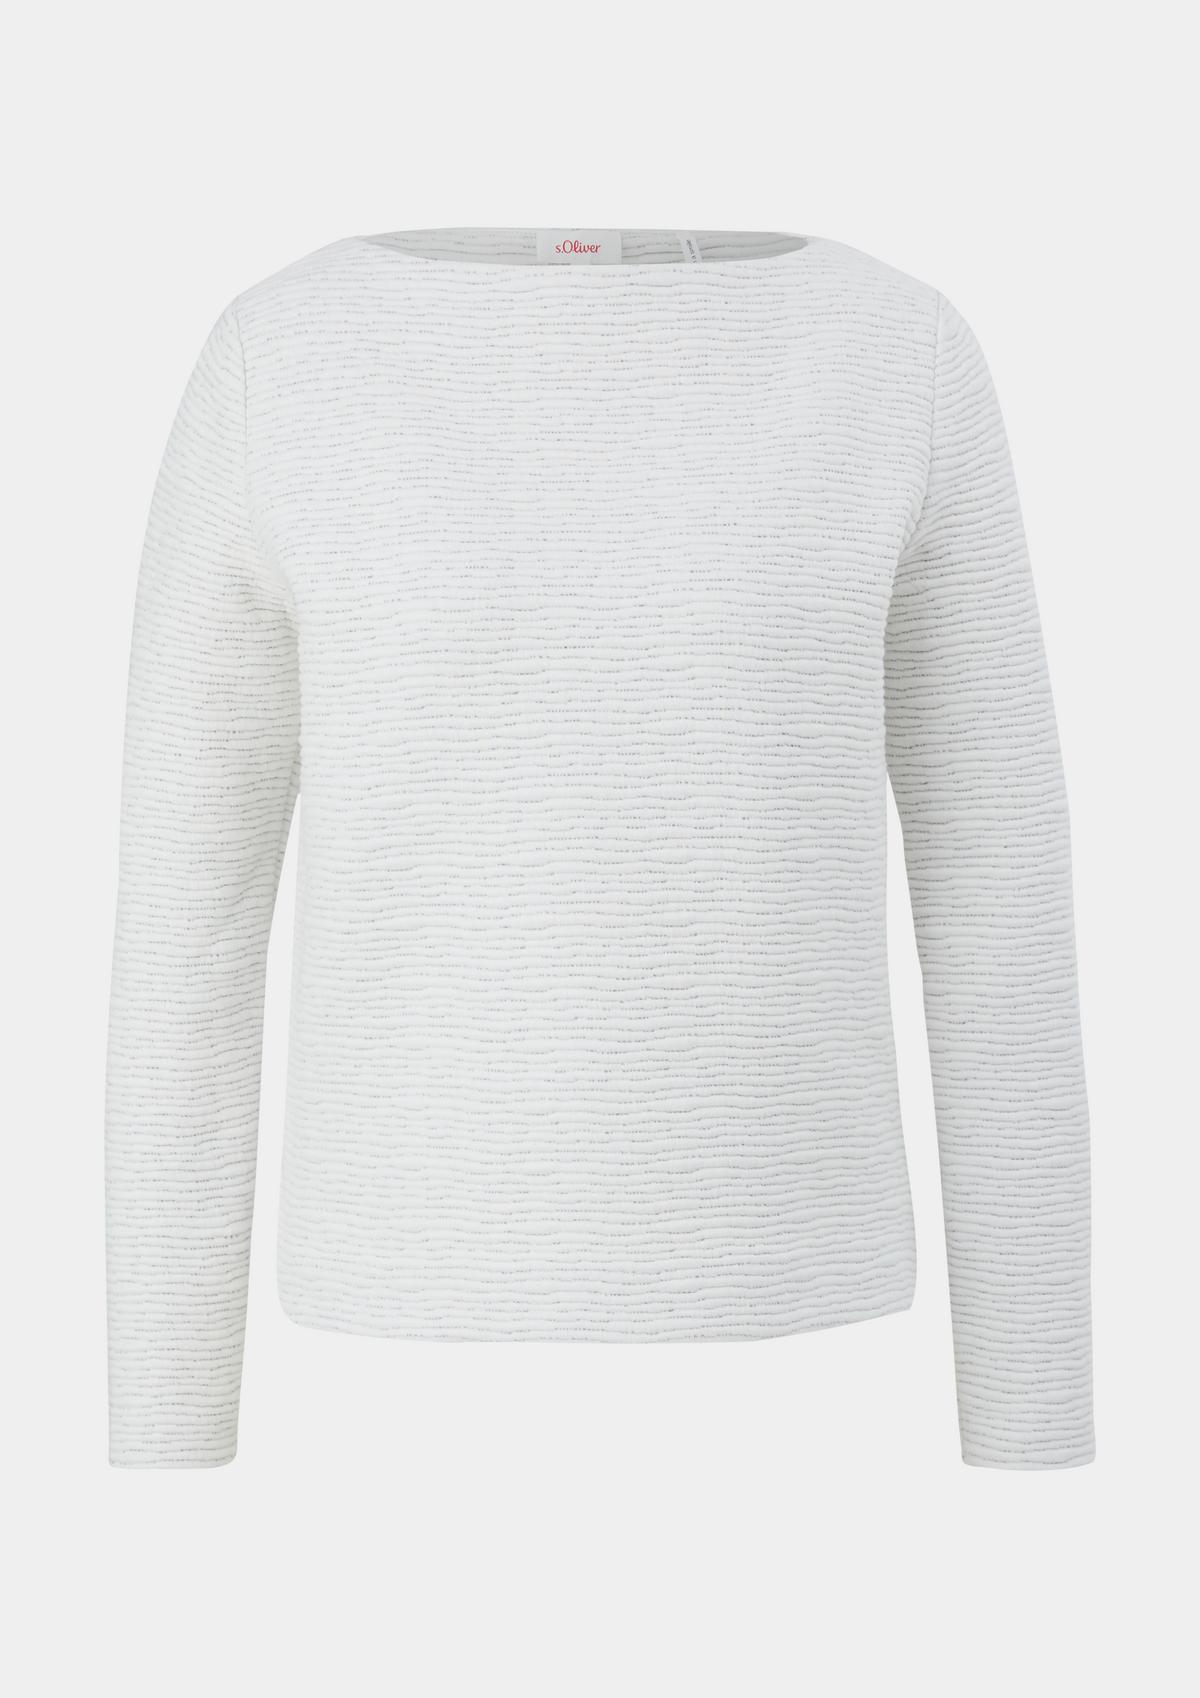 s.Oliver Sweatshirt with a textured pattern